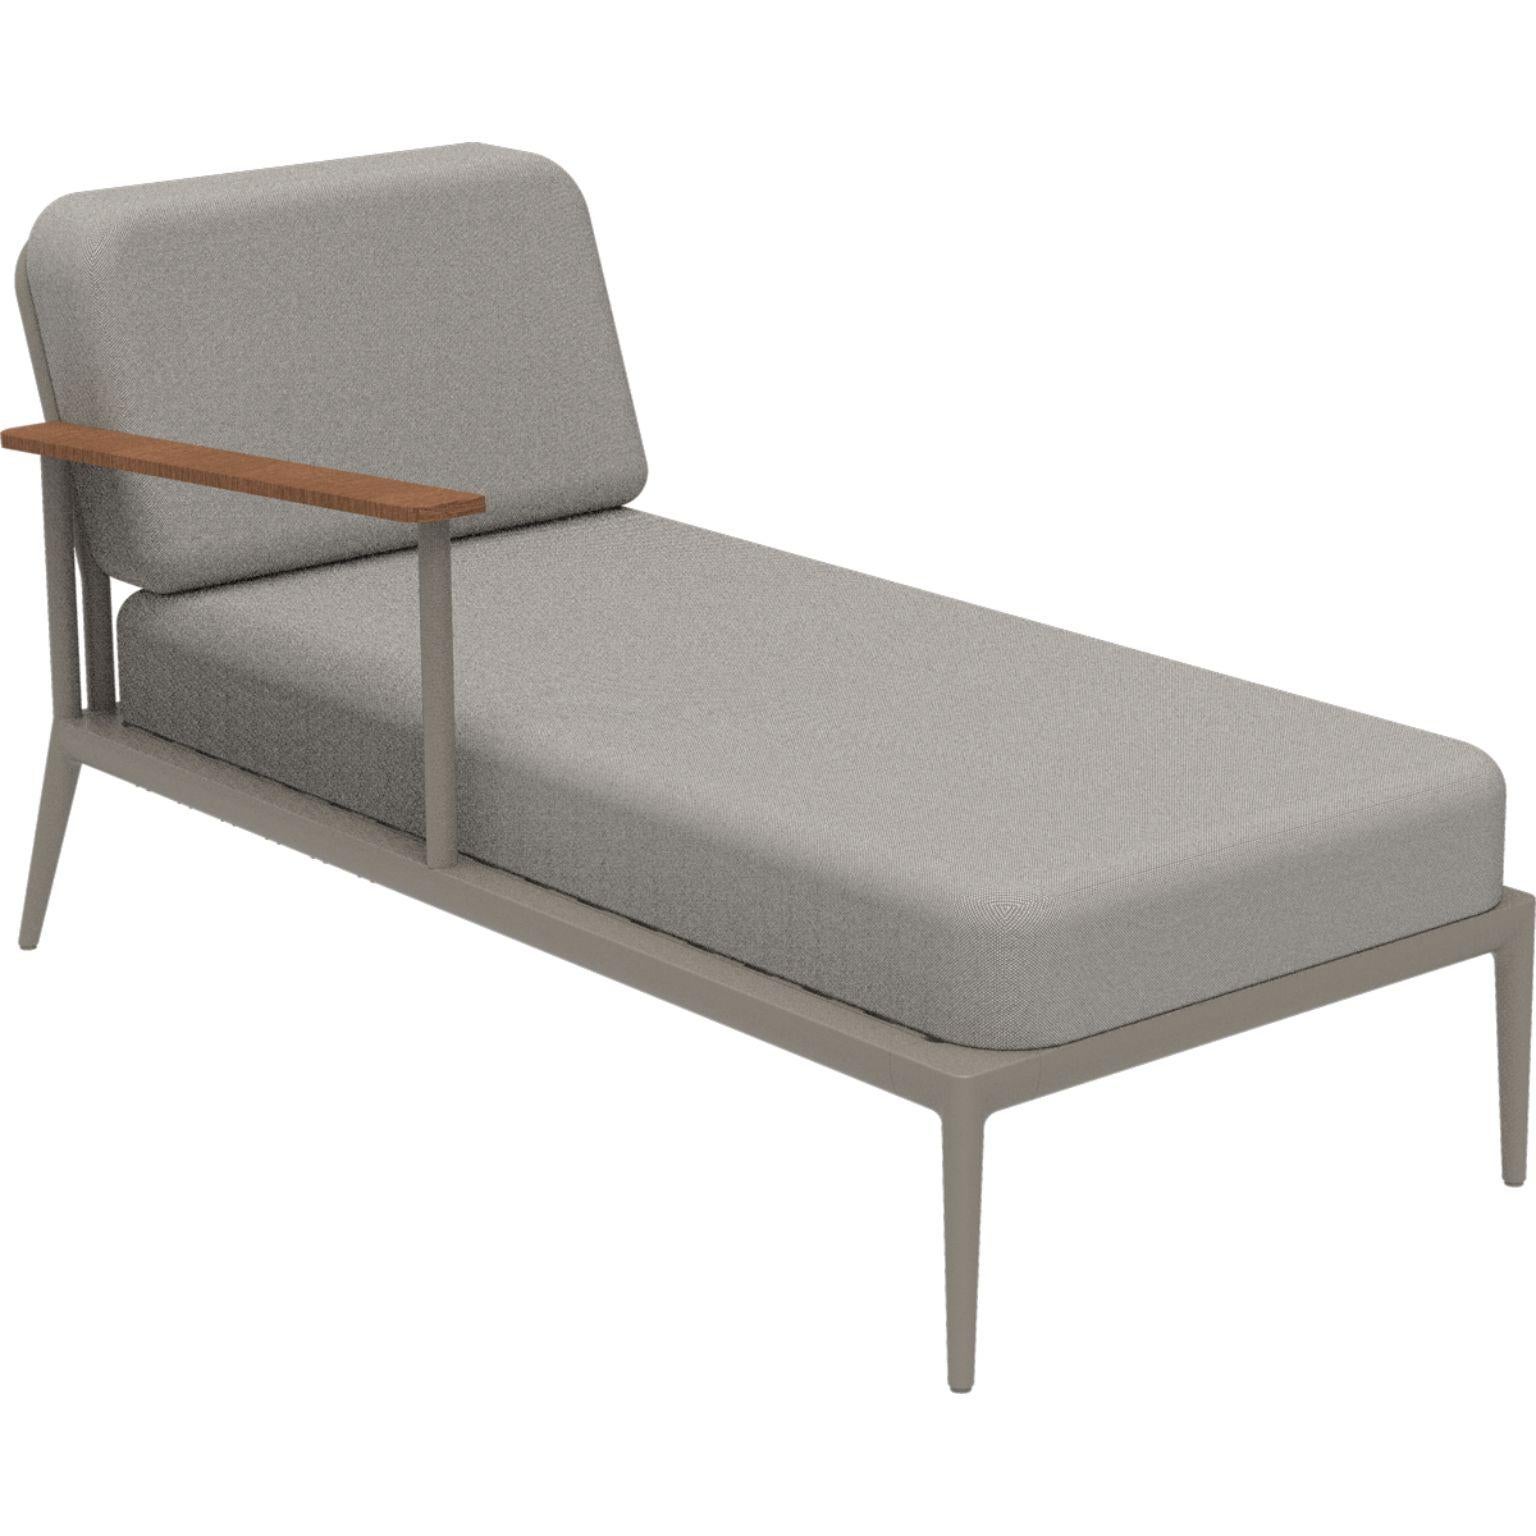 Nature cream right chaise longue by MOWEE
Dimensions: D155 x W76 x H81 cm (seat height 42 cm).
Material: Aluminum, upholstery and Iroko Wood.
Weight: 28 kg.
Also available in different colors and finishes.

An unmistakable collection for its